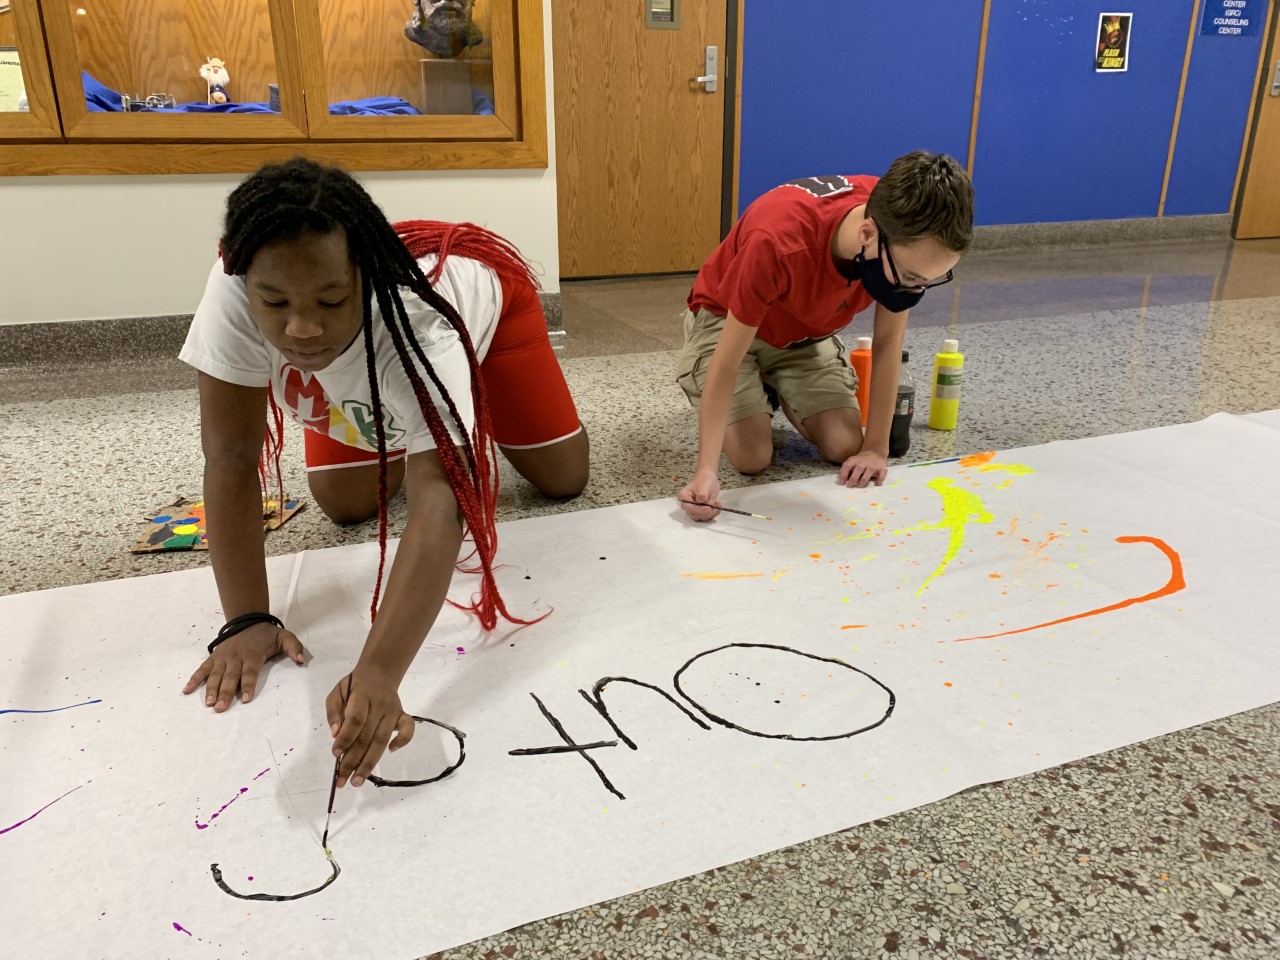 Student council prepares decorations for homecoming on September 11. Members have been preparing for homecoming since the beginning of the school year.